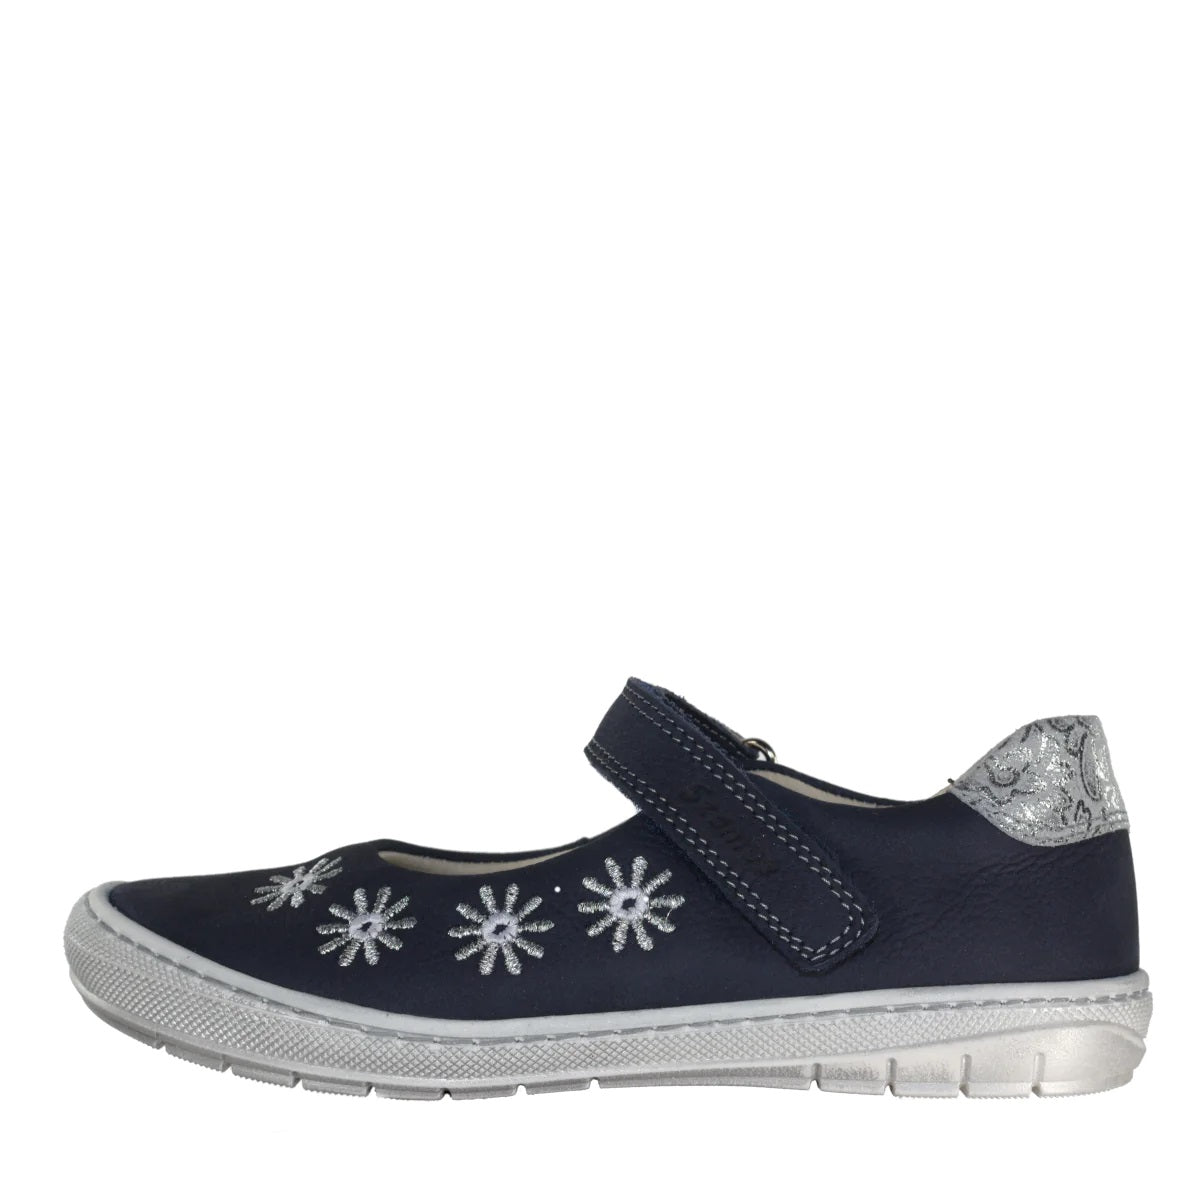 Szamos Kid Girl Dress Shoes In Denim Blue Color And White Flowers With Velcro Strap - Made In Europe - shoekid.ca